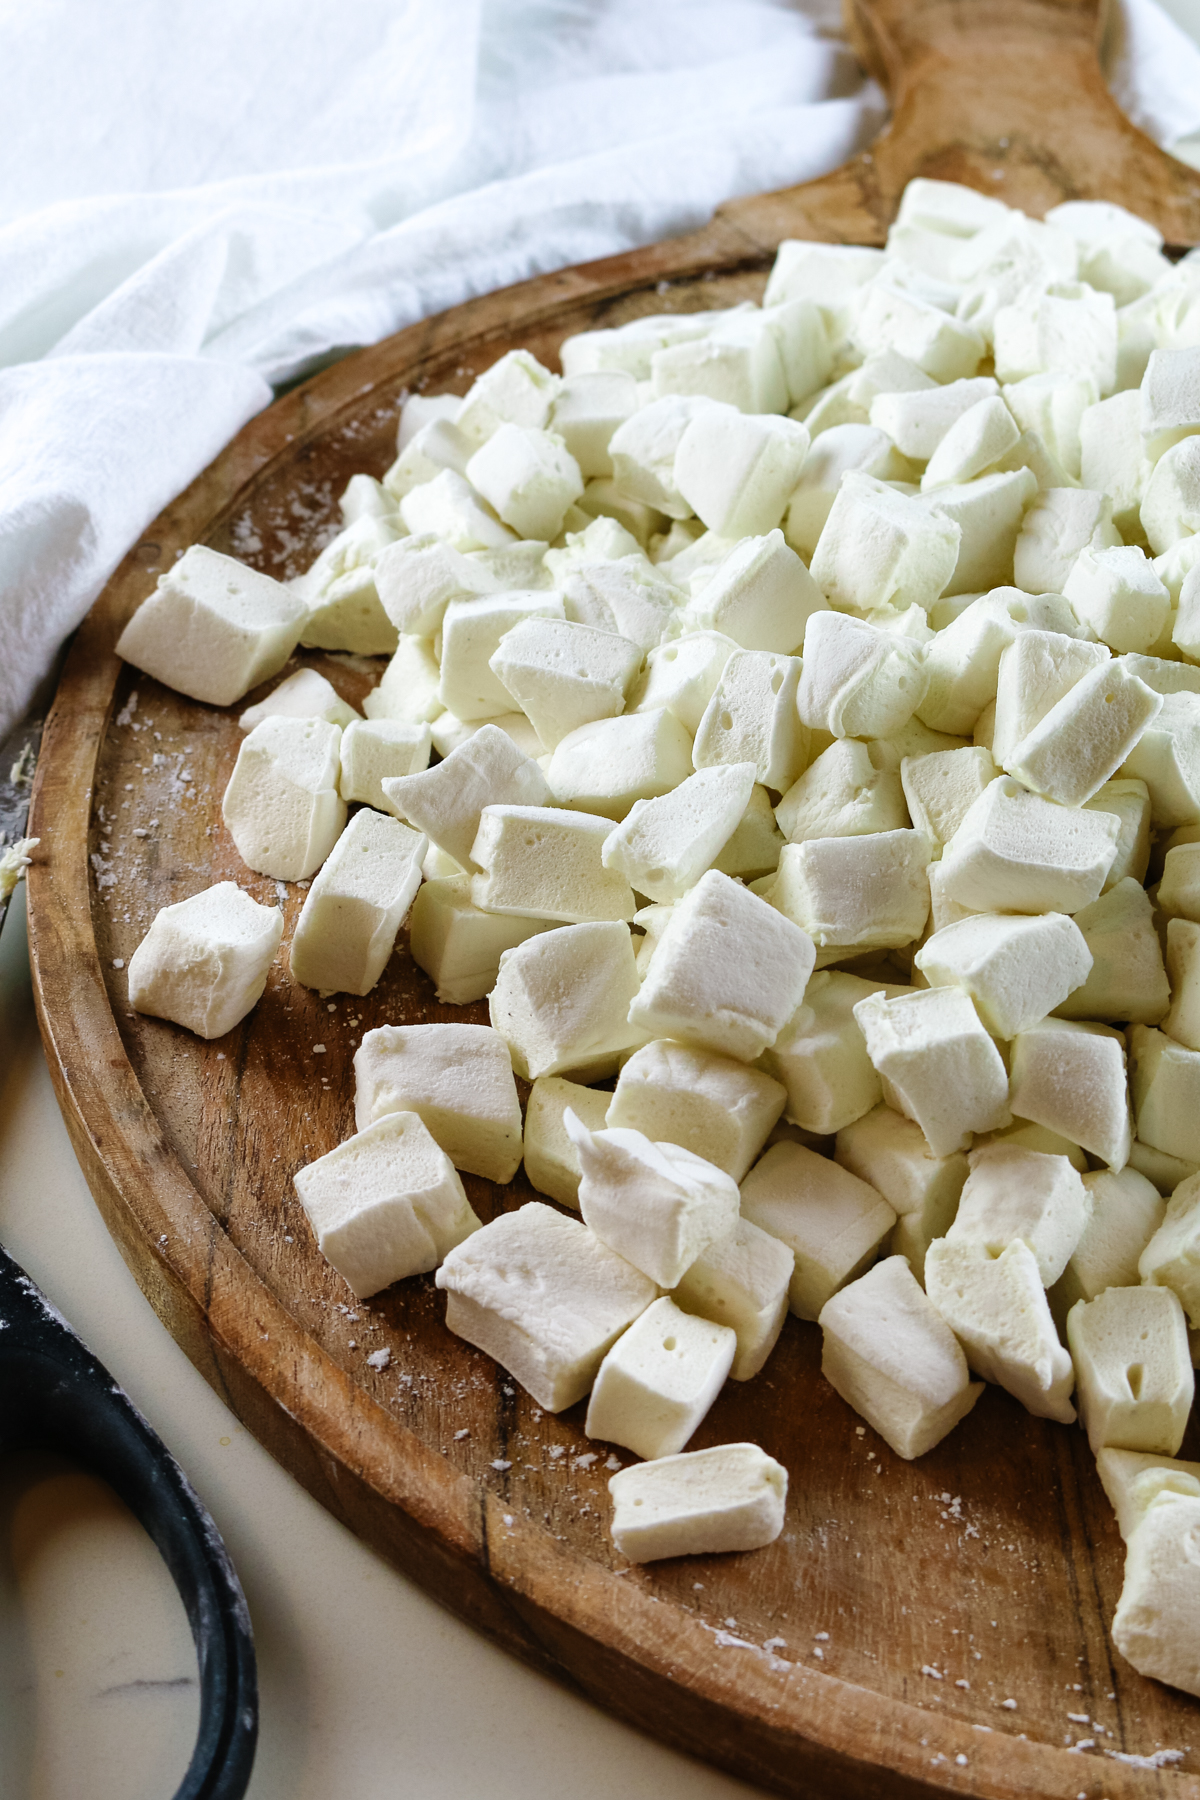 marshmallows cut into small pieces on a wooden cutting board with a pair of kitchen shears to the side.